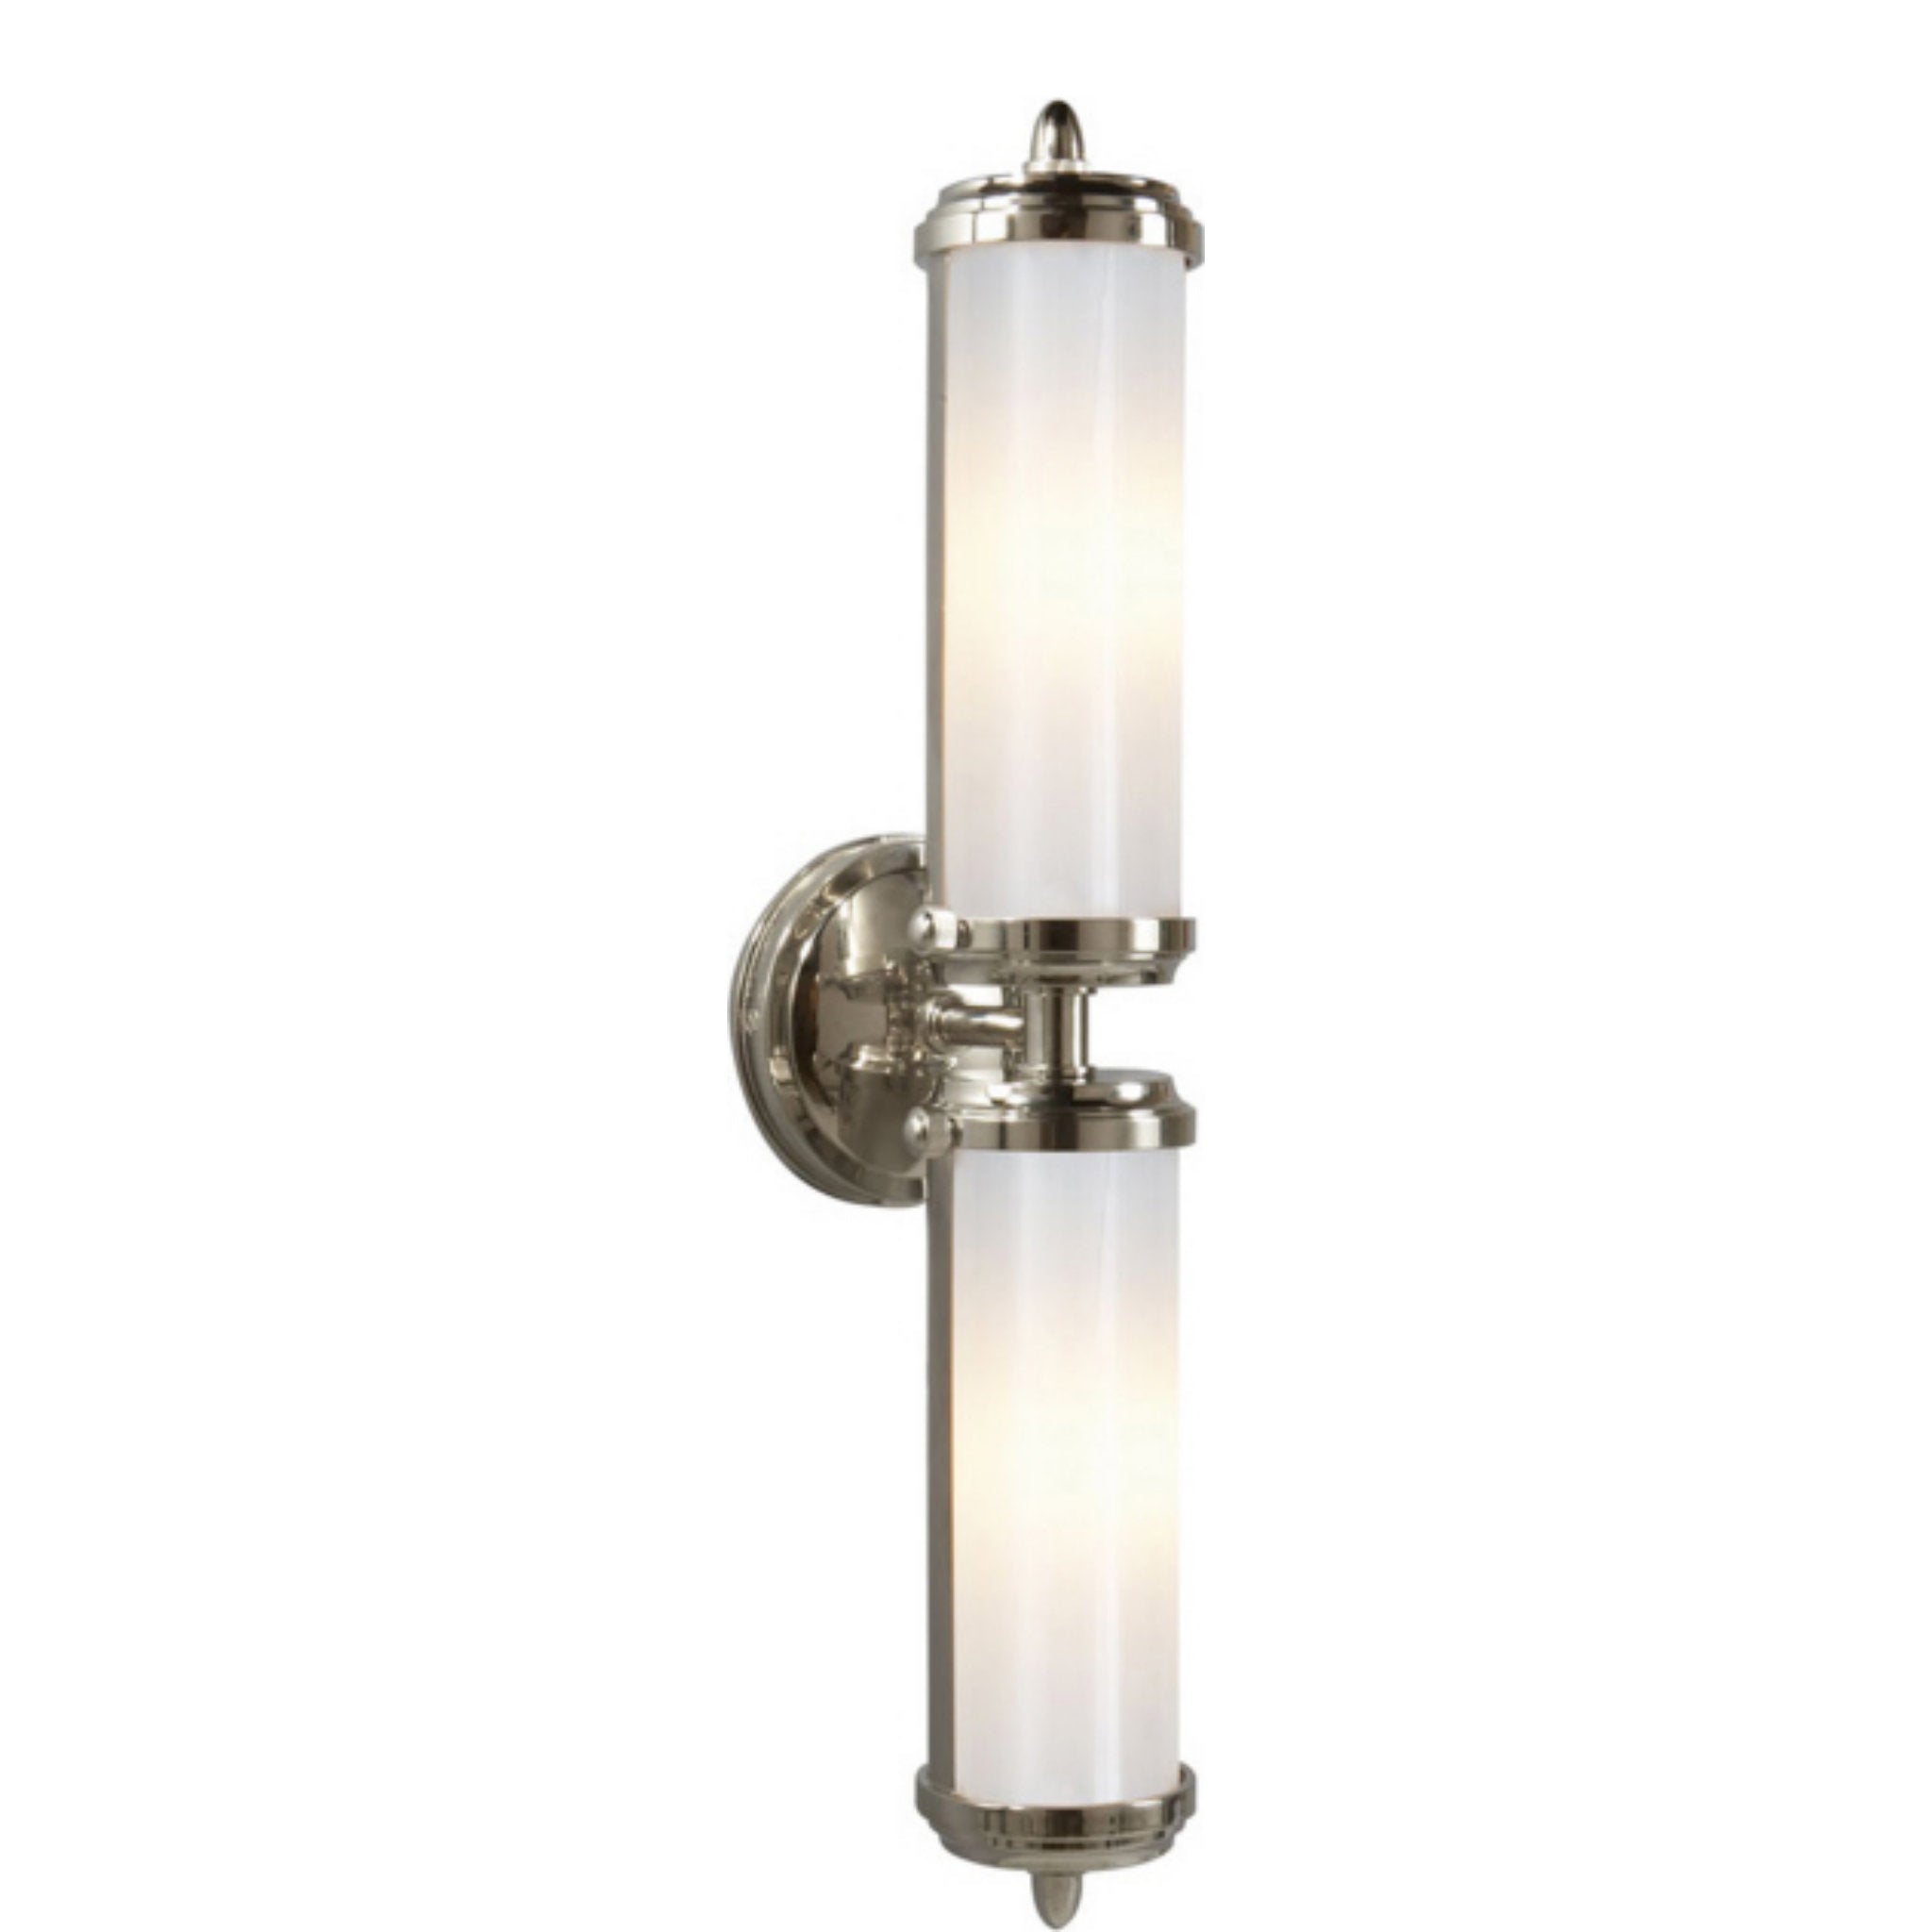 Thomas O'Brien Merchant Double Bath Light in Polished Nickel with White Glass